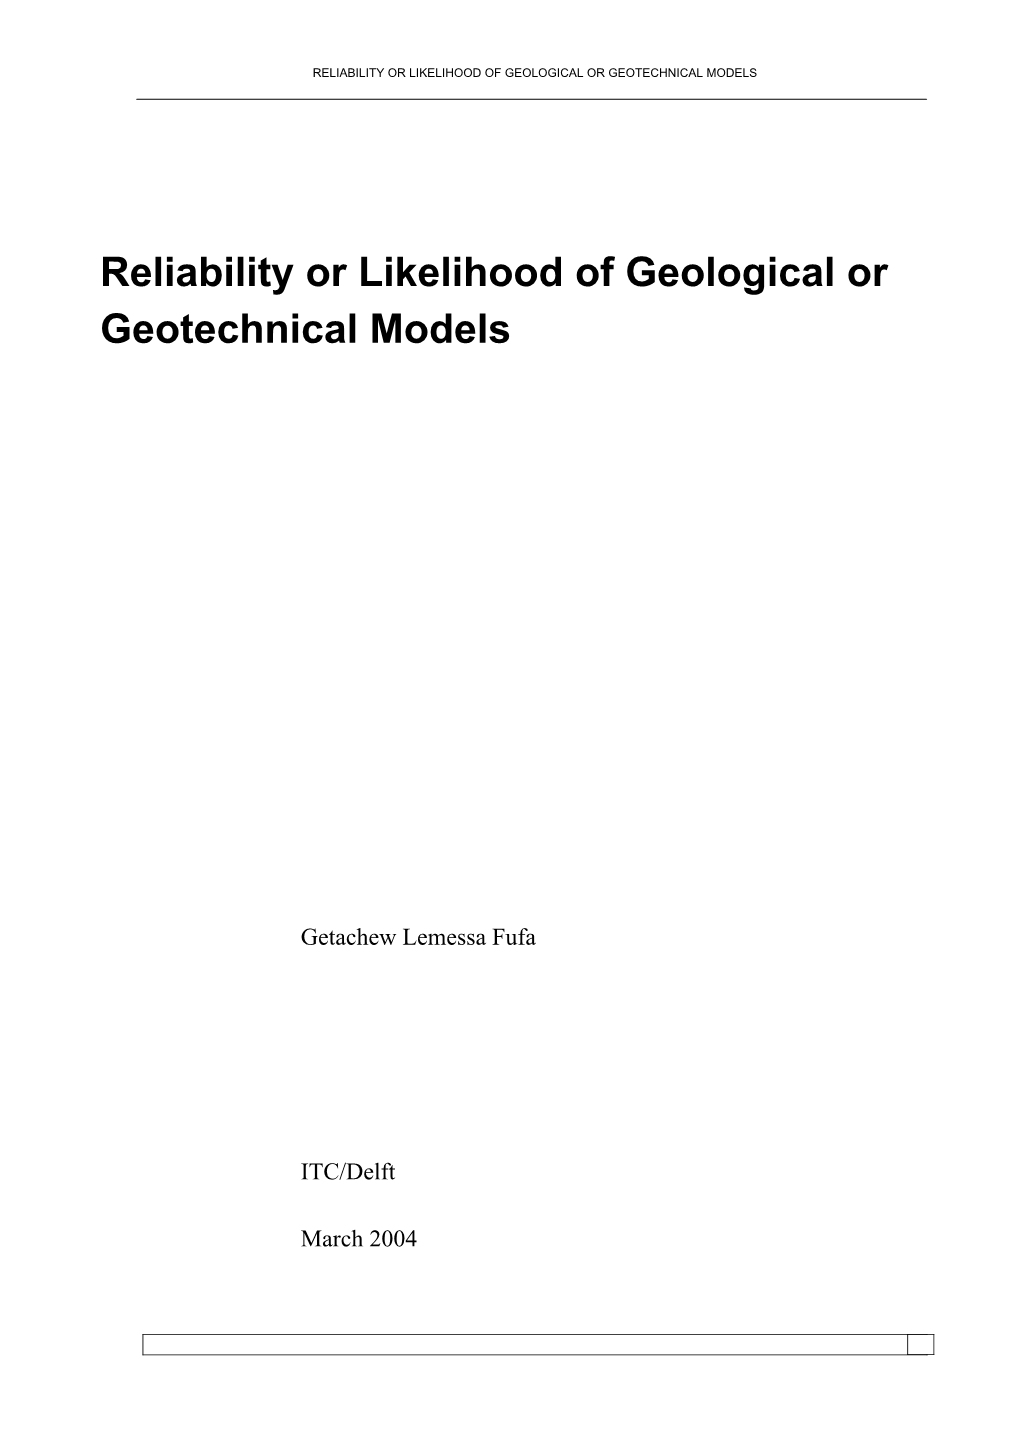 Reliability Or Likelihood of Geological Or Geotechnical Models